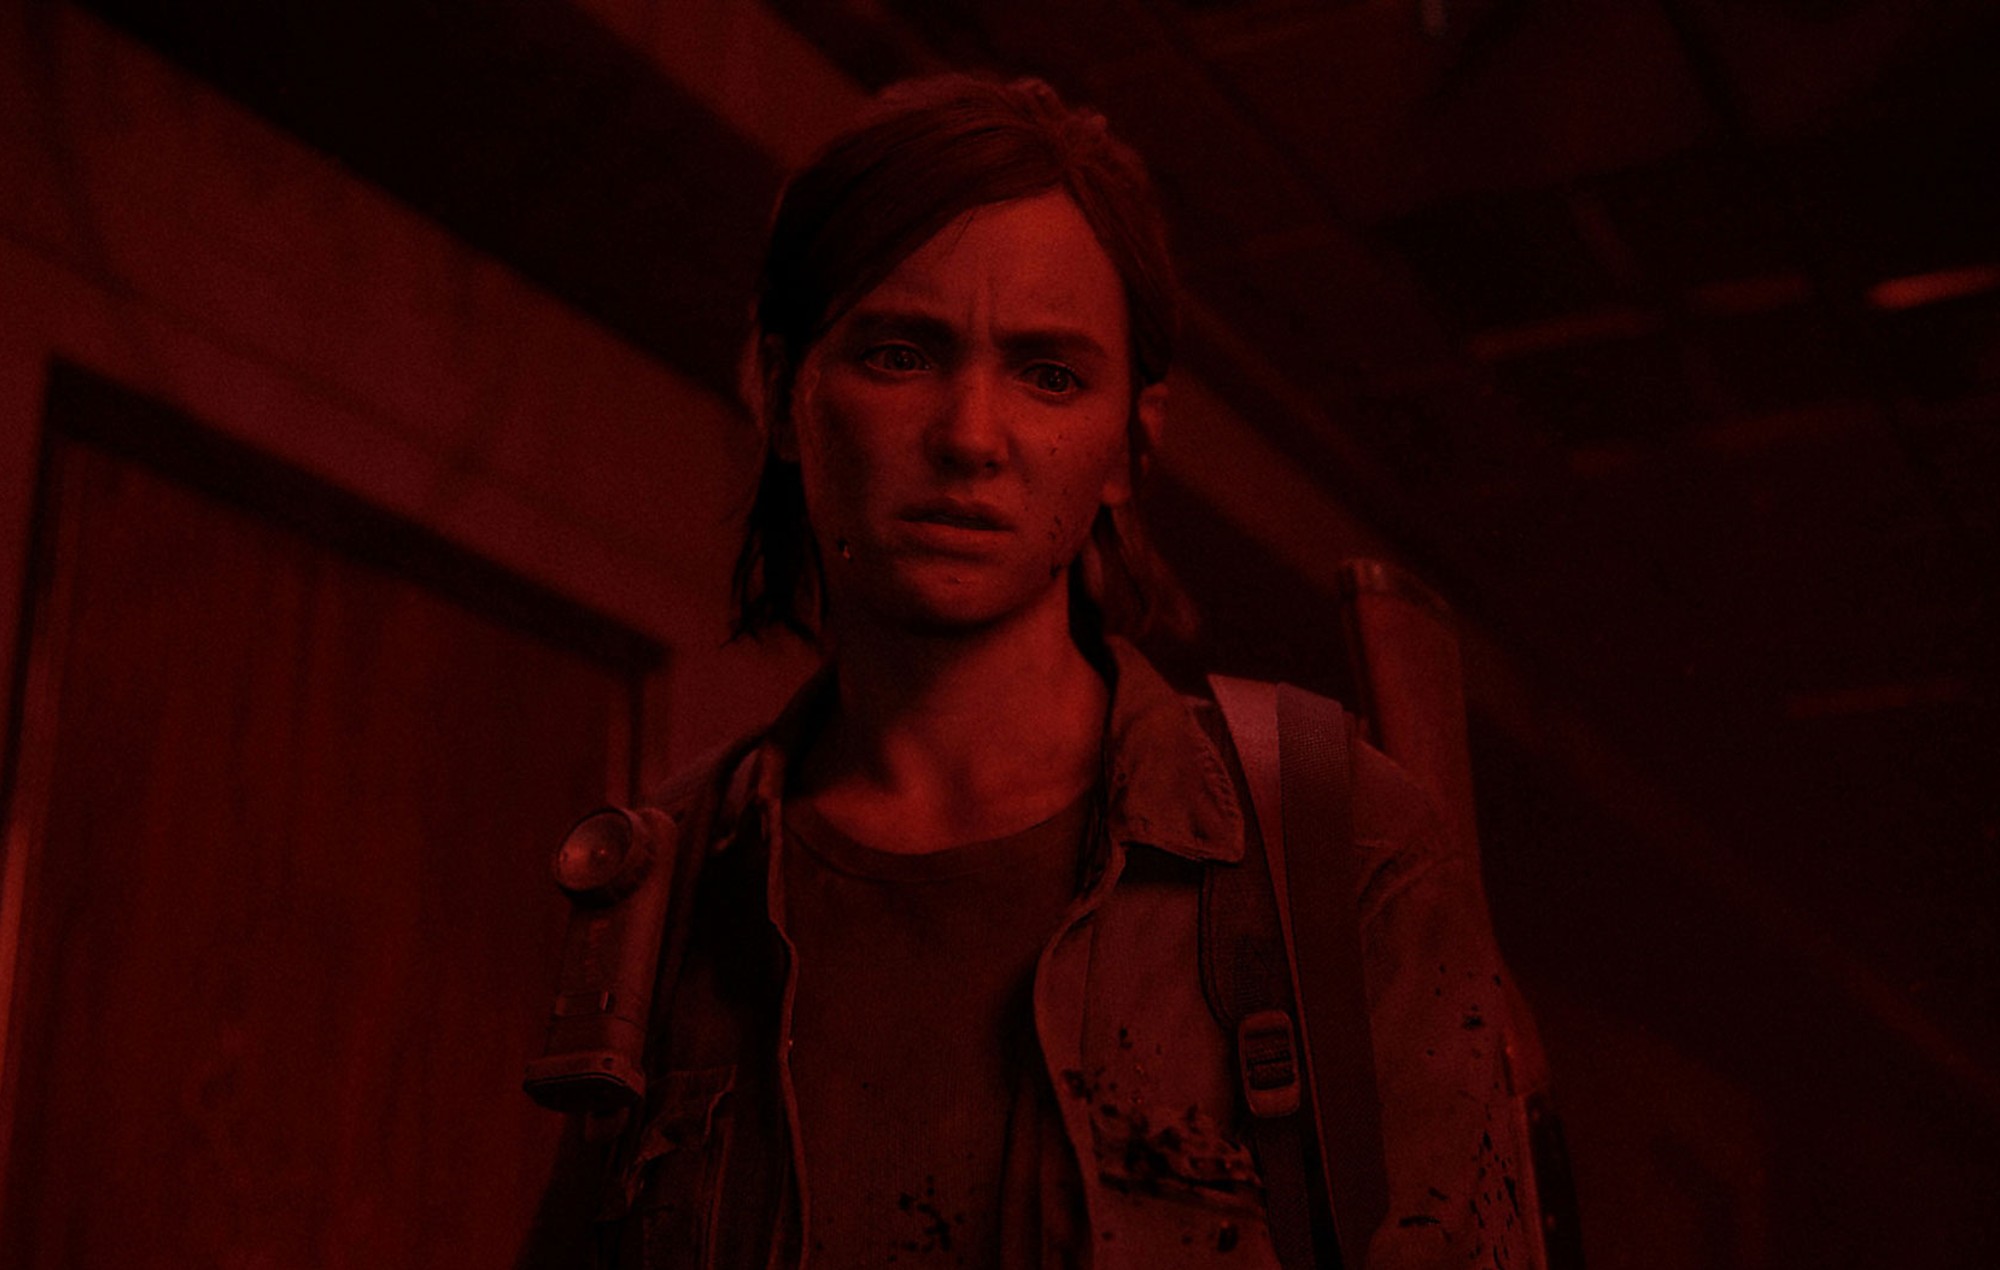 'The Last Of Us' director is "working on another game"